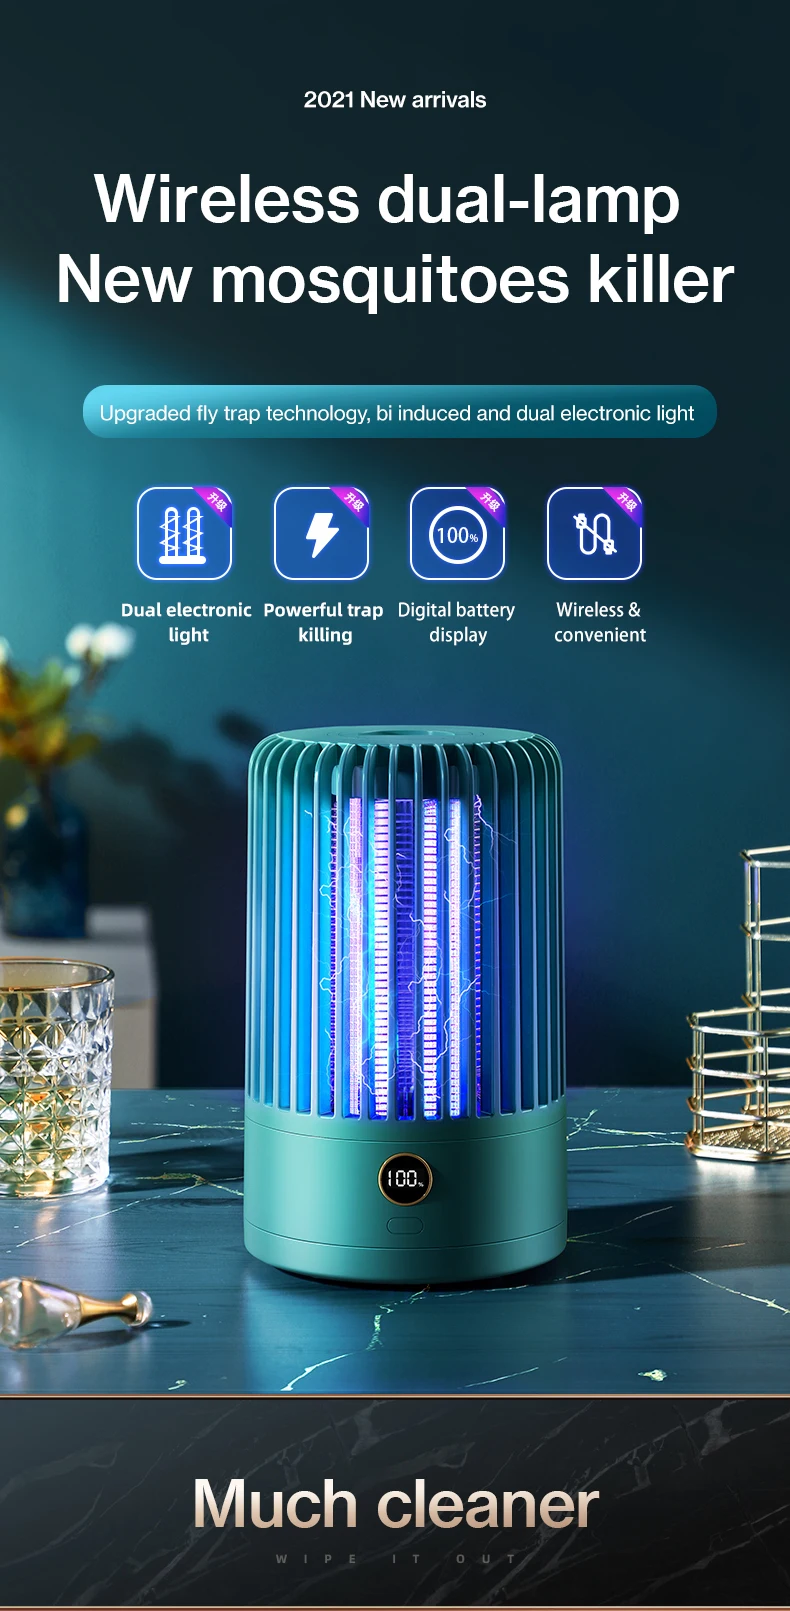 Outdoor Mosquito Killer Machine Amazon Best Sellers 2021 New Arrivals Mosquito Killer Lamp For Home Wholesale Trending Products